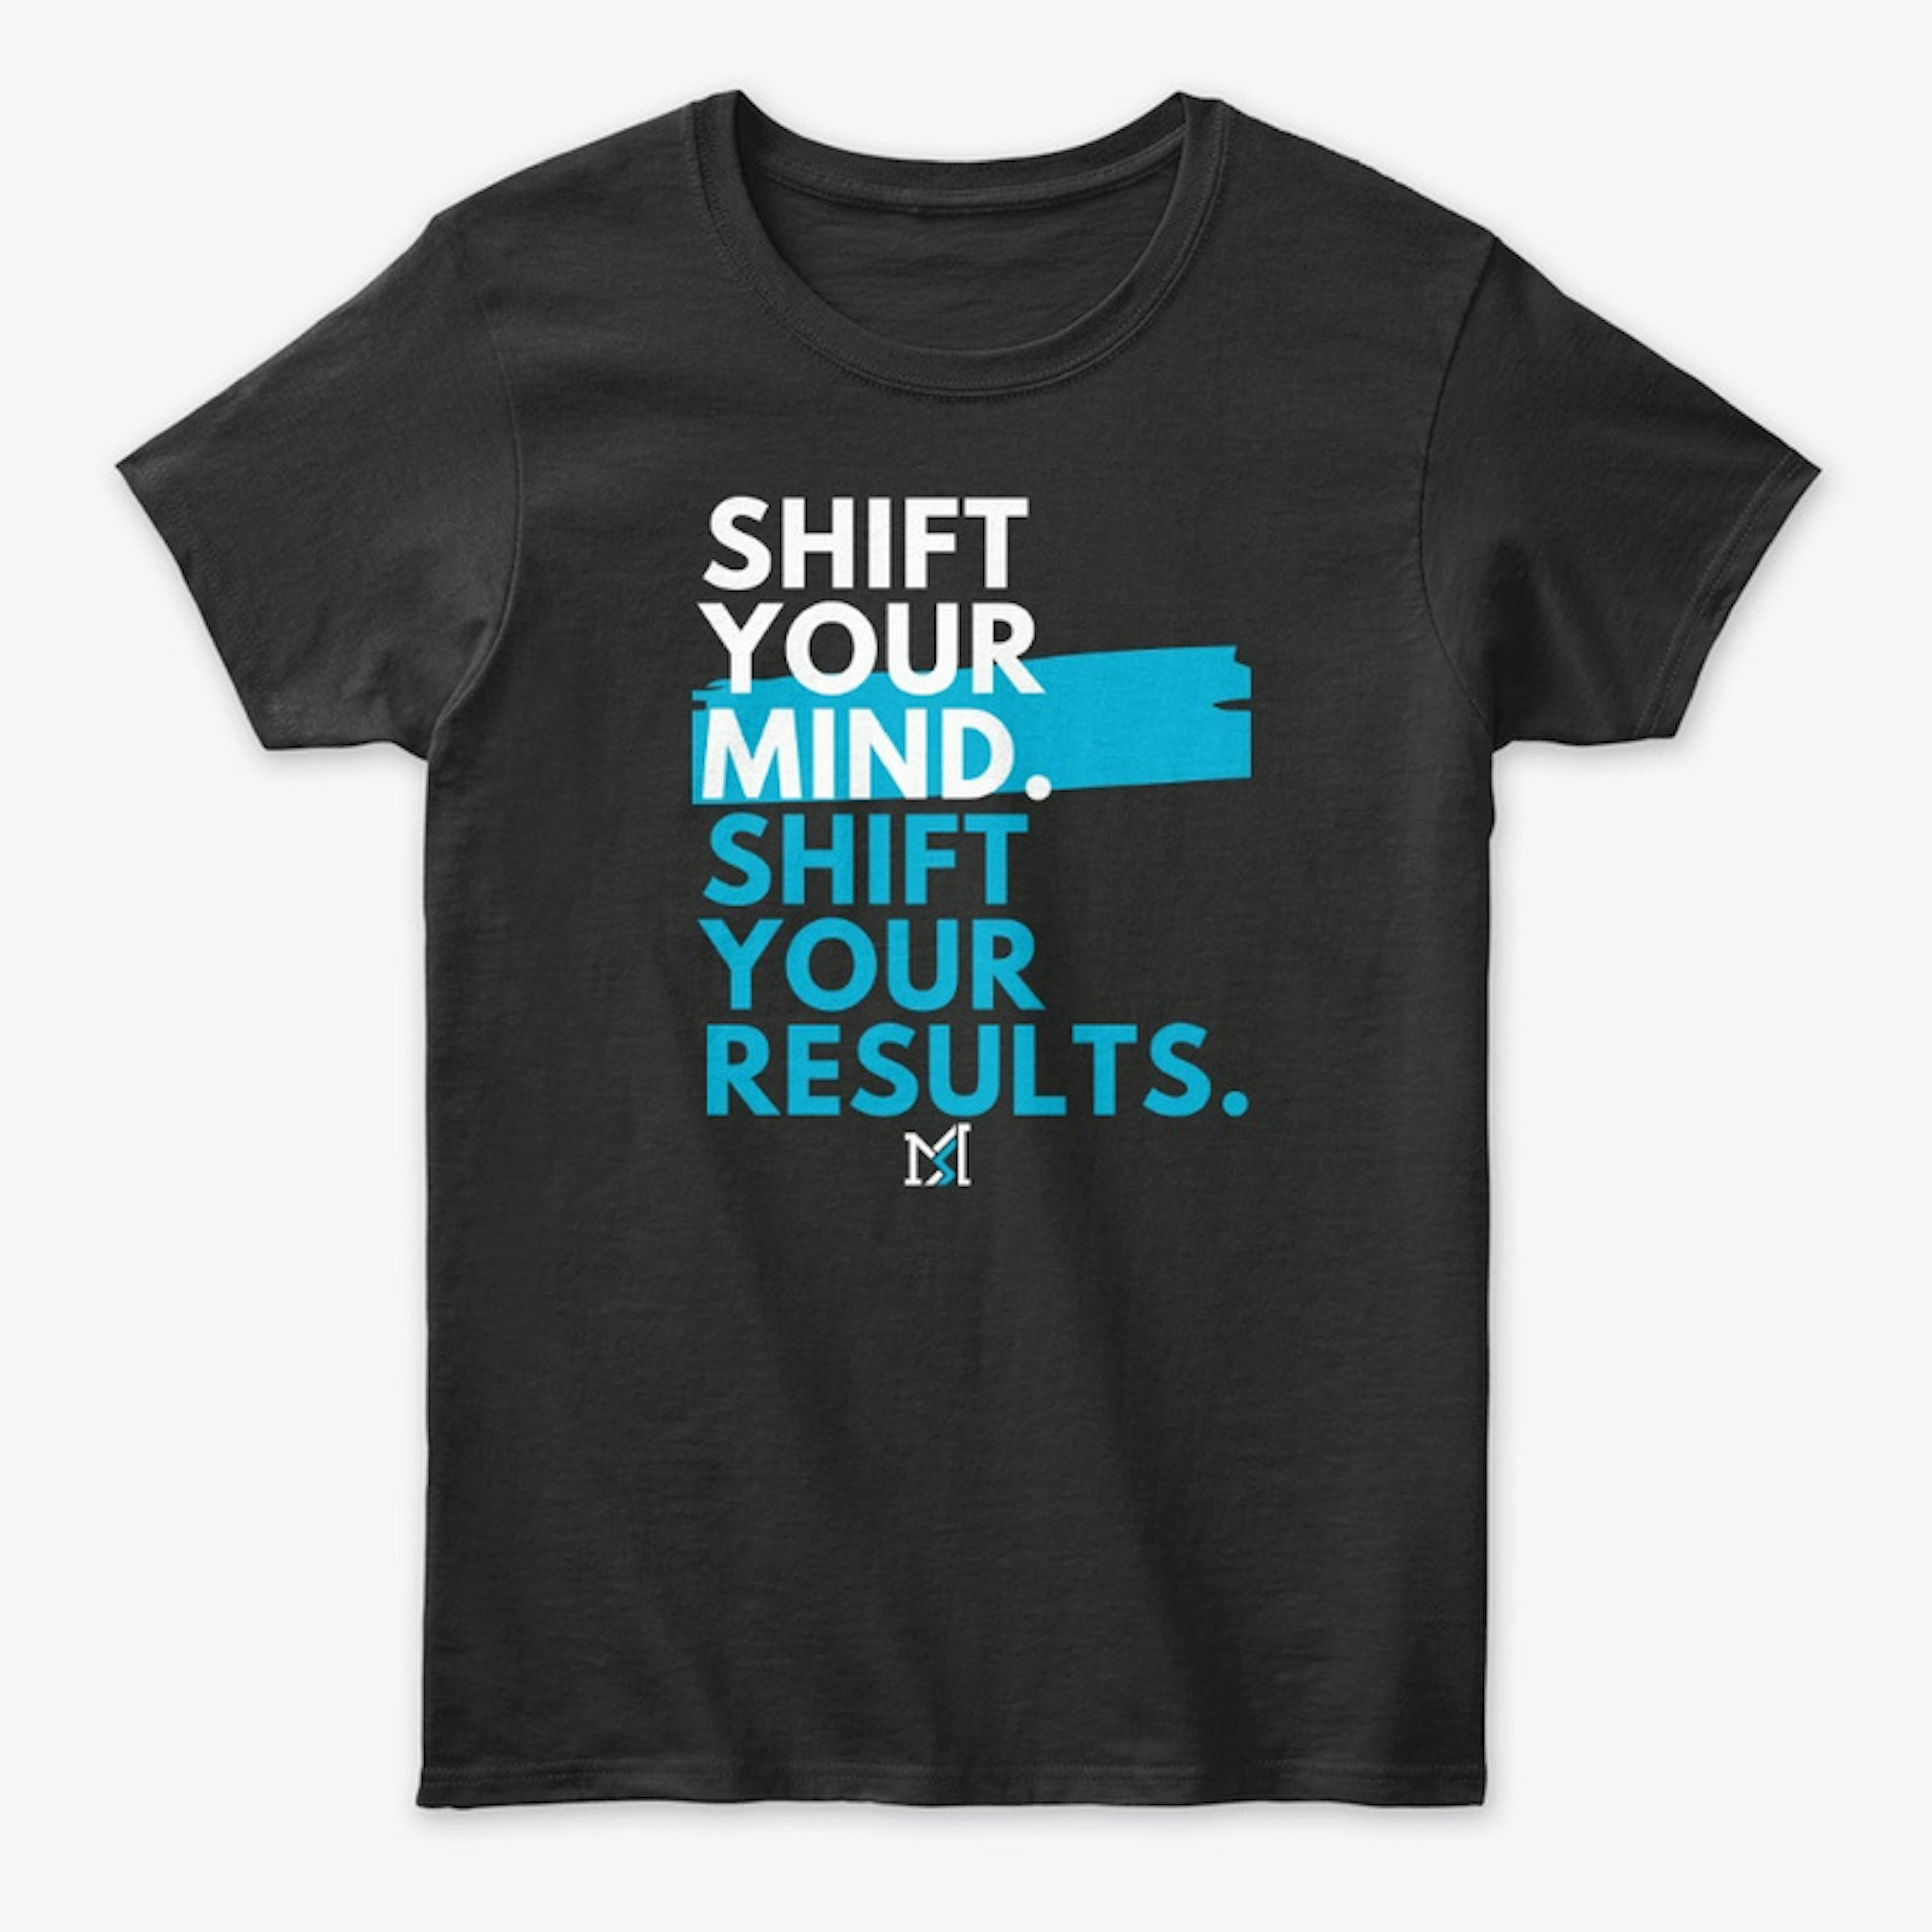 Shift your mind - Black Tee